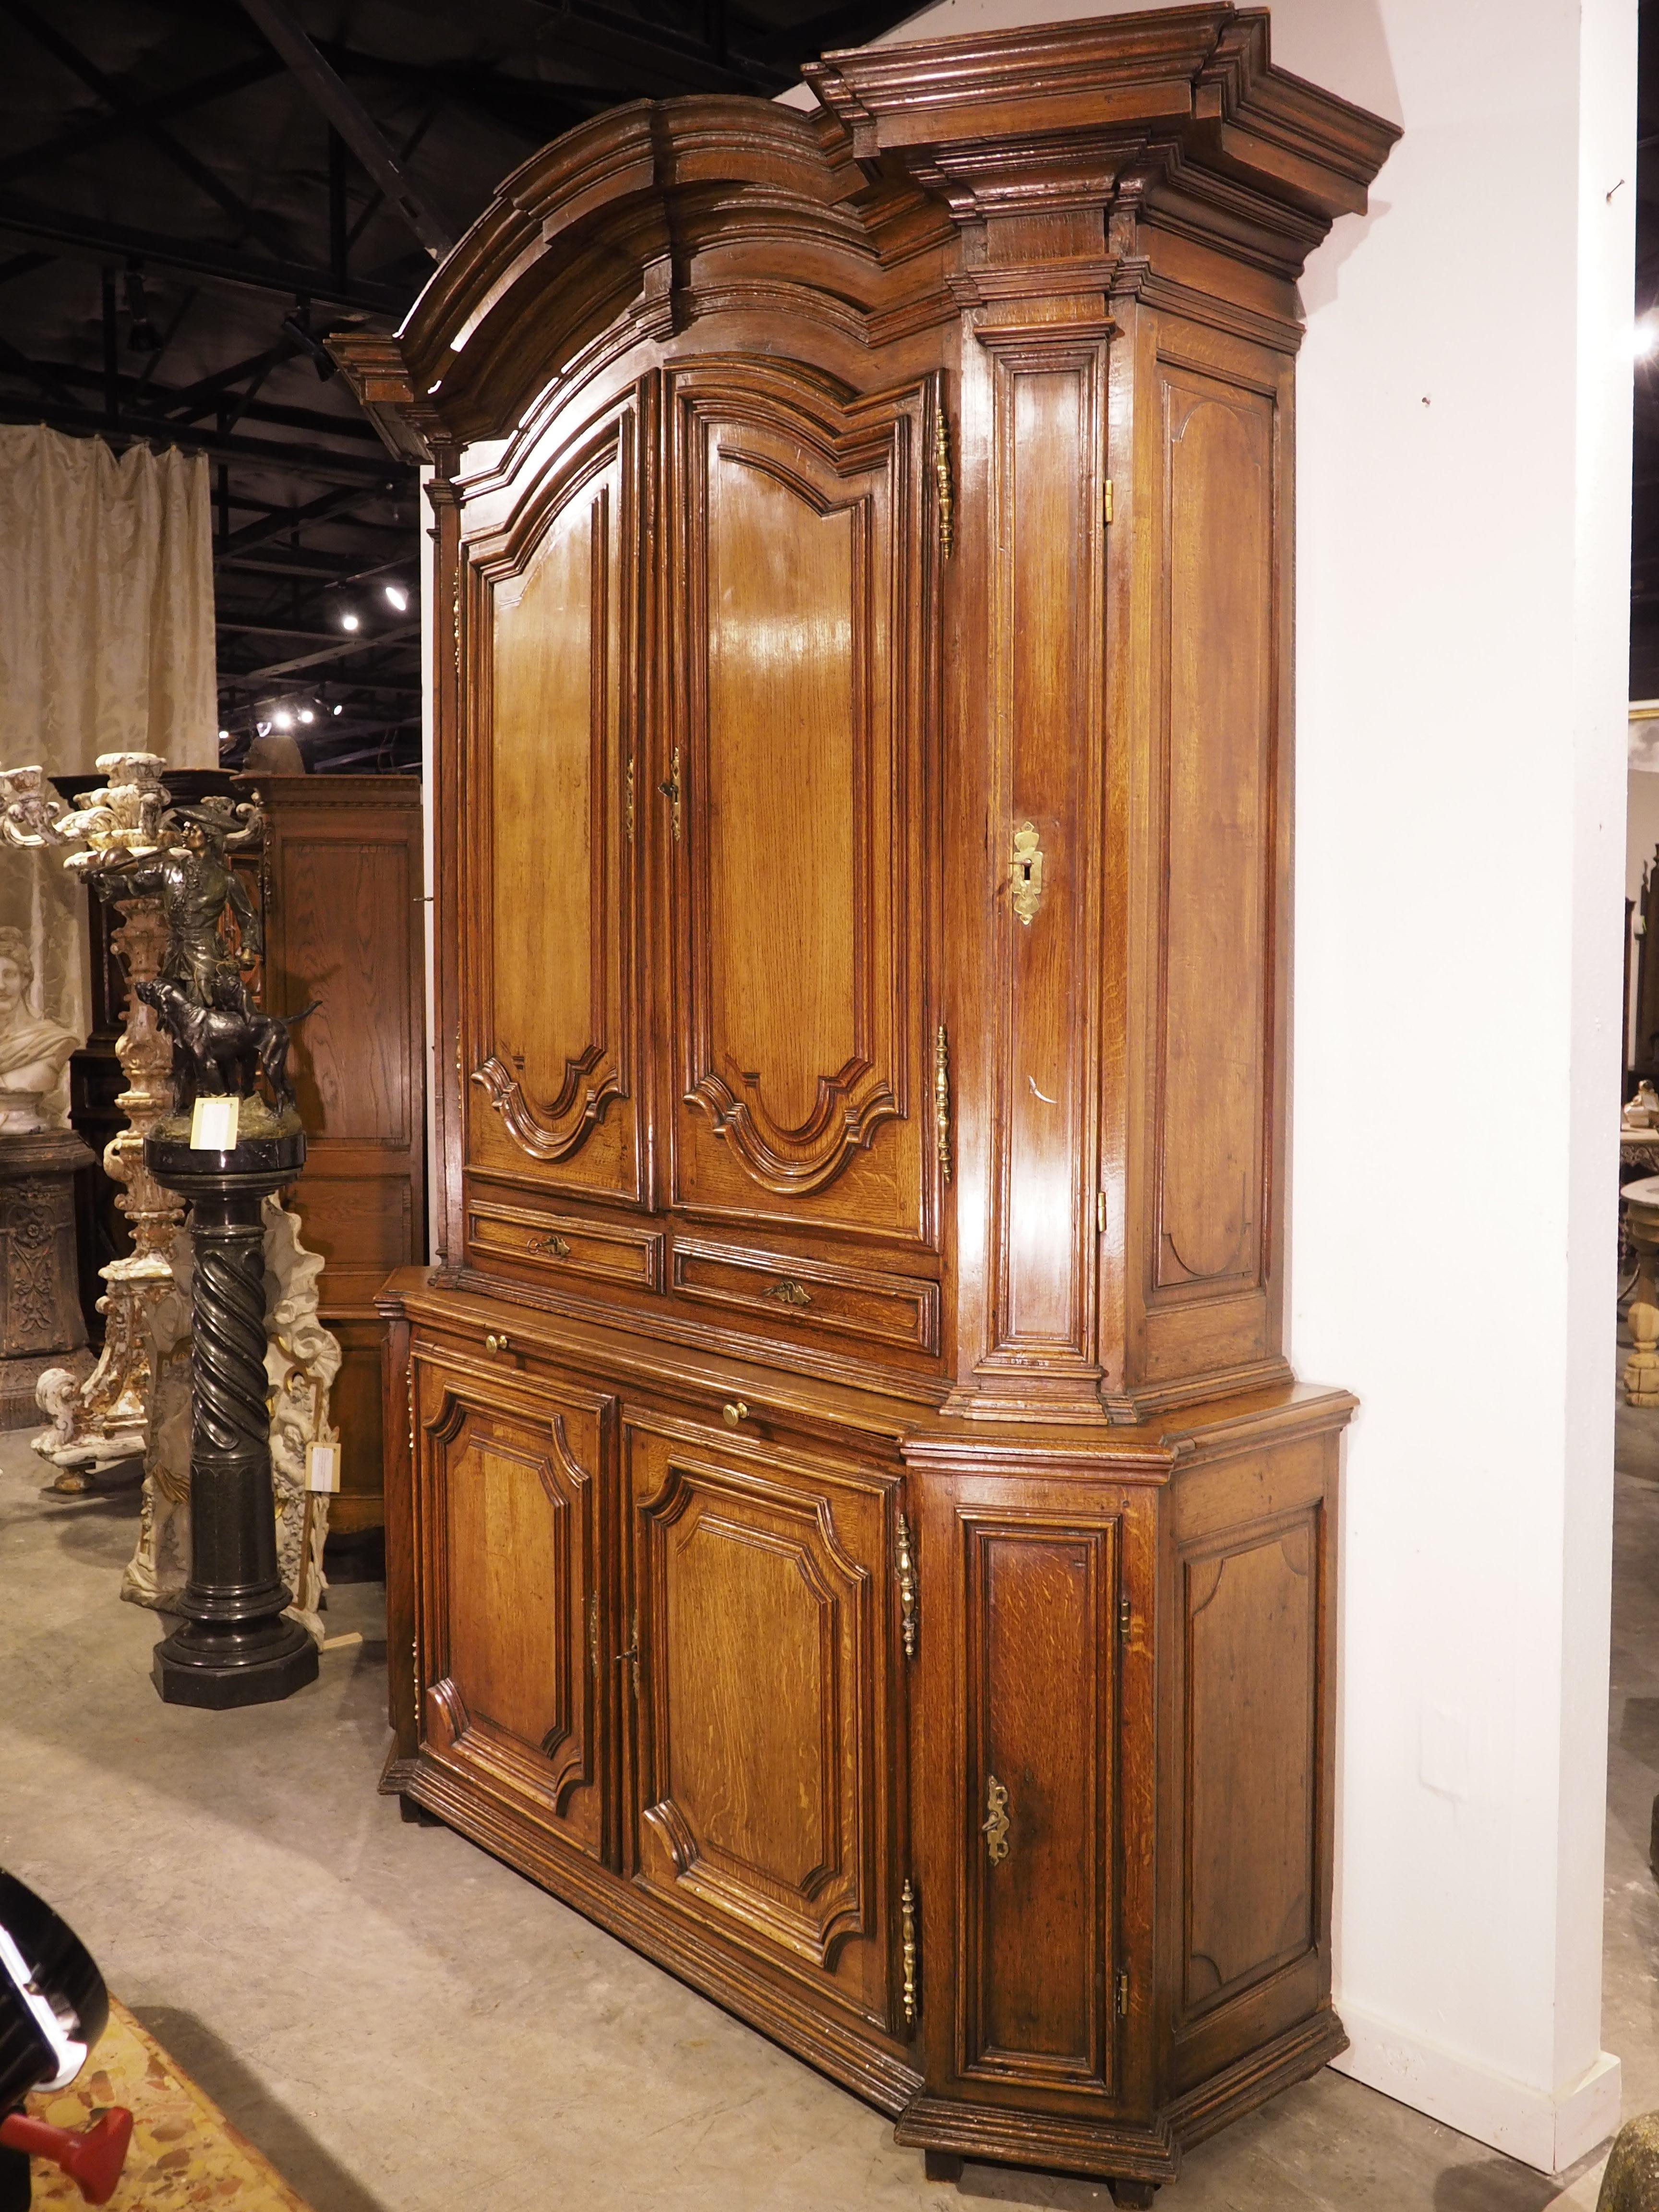 Hand-carved in France, circa 1700, this exceptional oak buffet deux corps offers ample storage space with eight doors, two drawers, and a pull-out tray. All the doors have functional locks, which are operated by seven keys (the two doors on the left